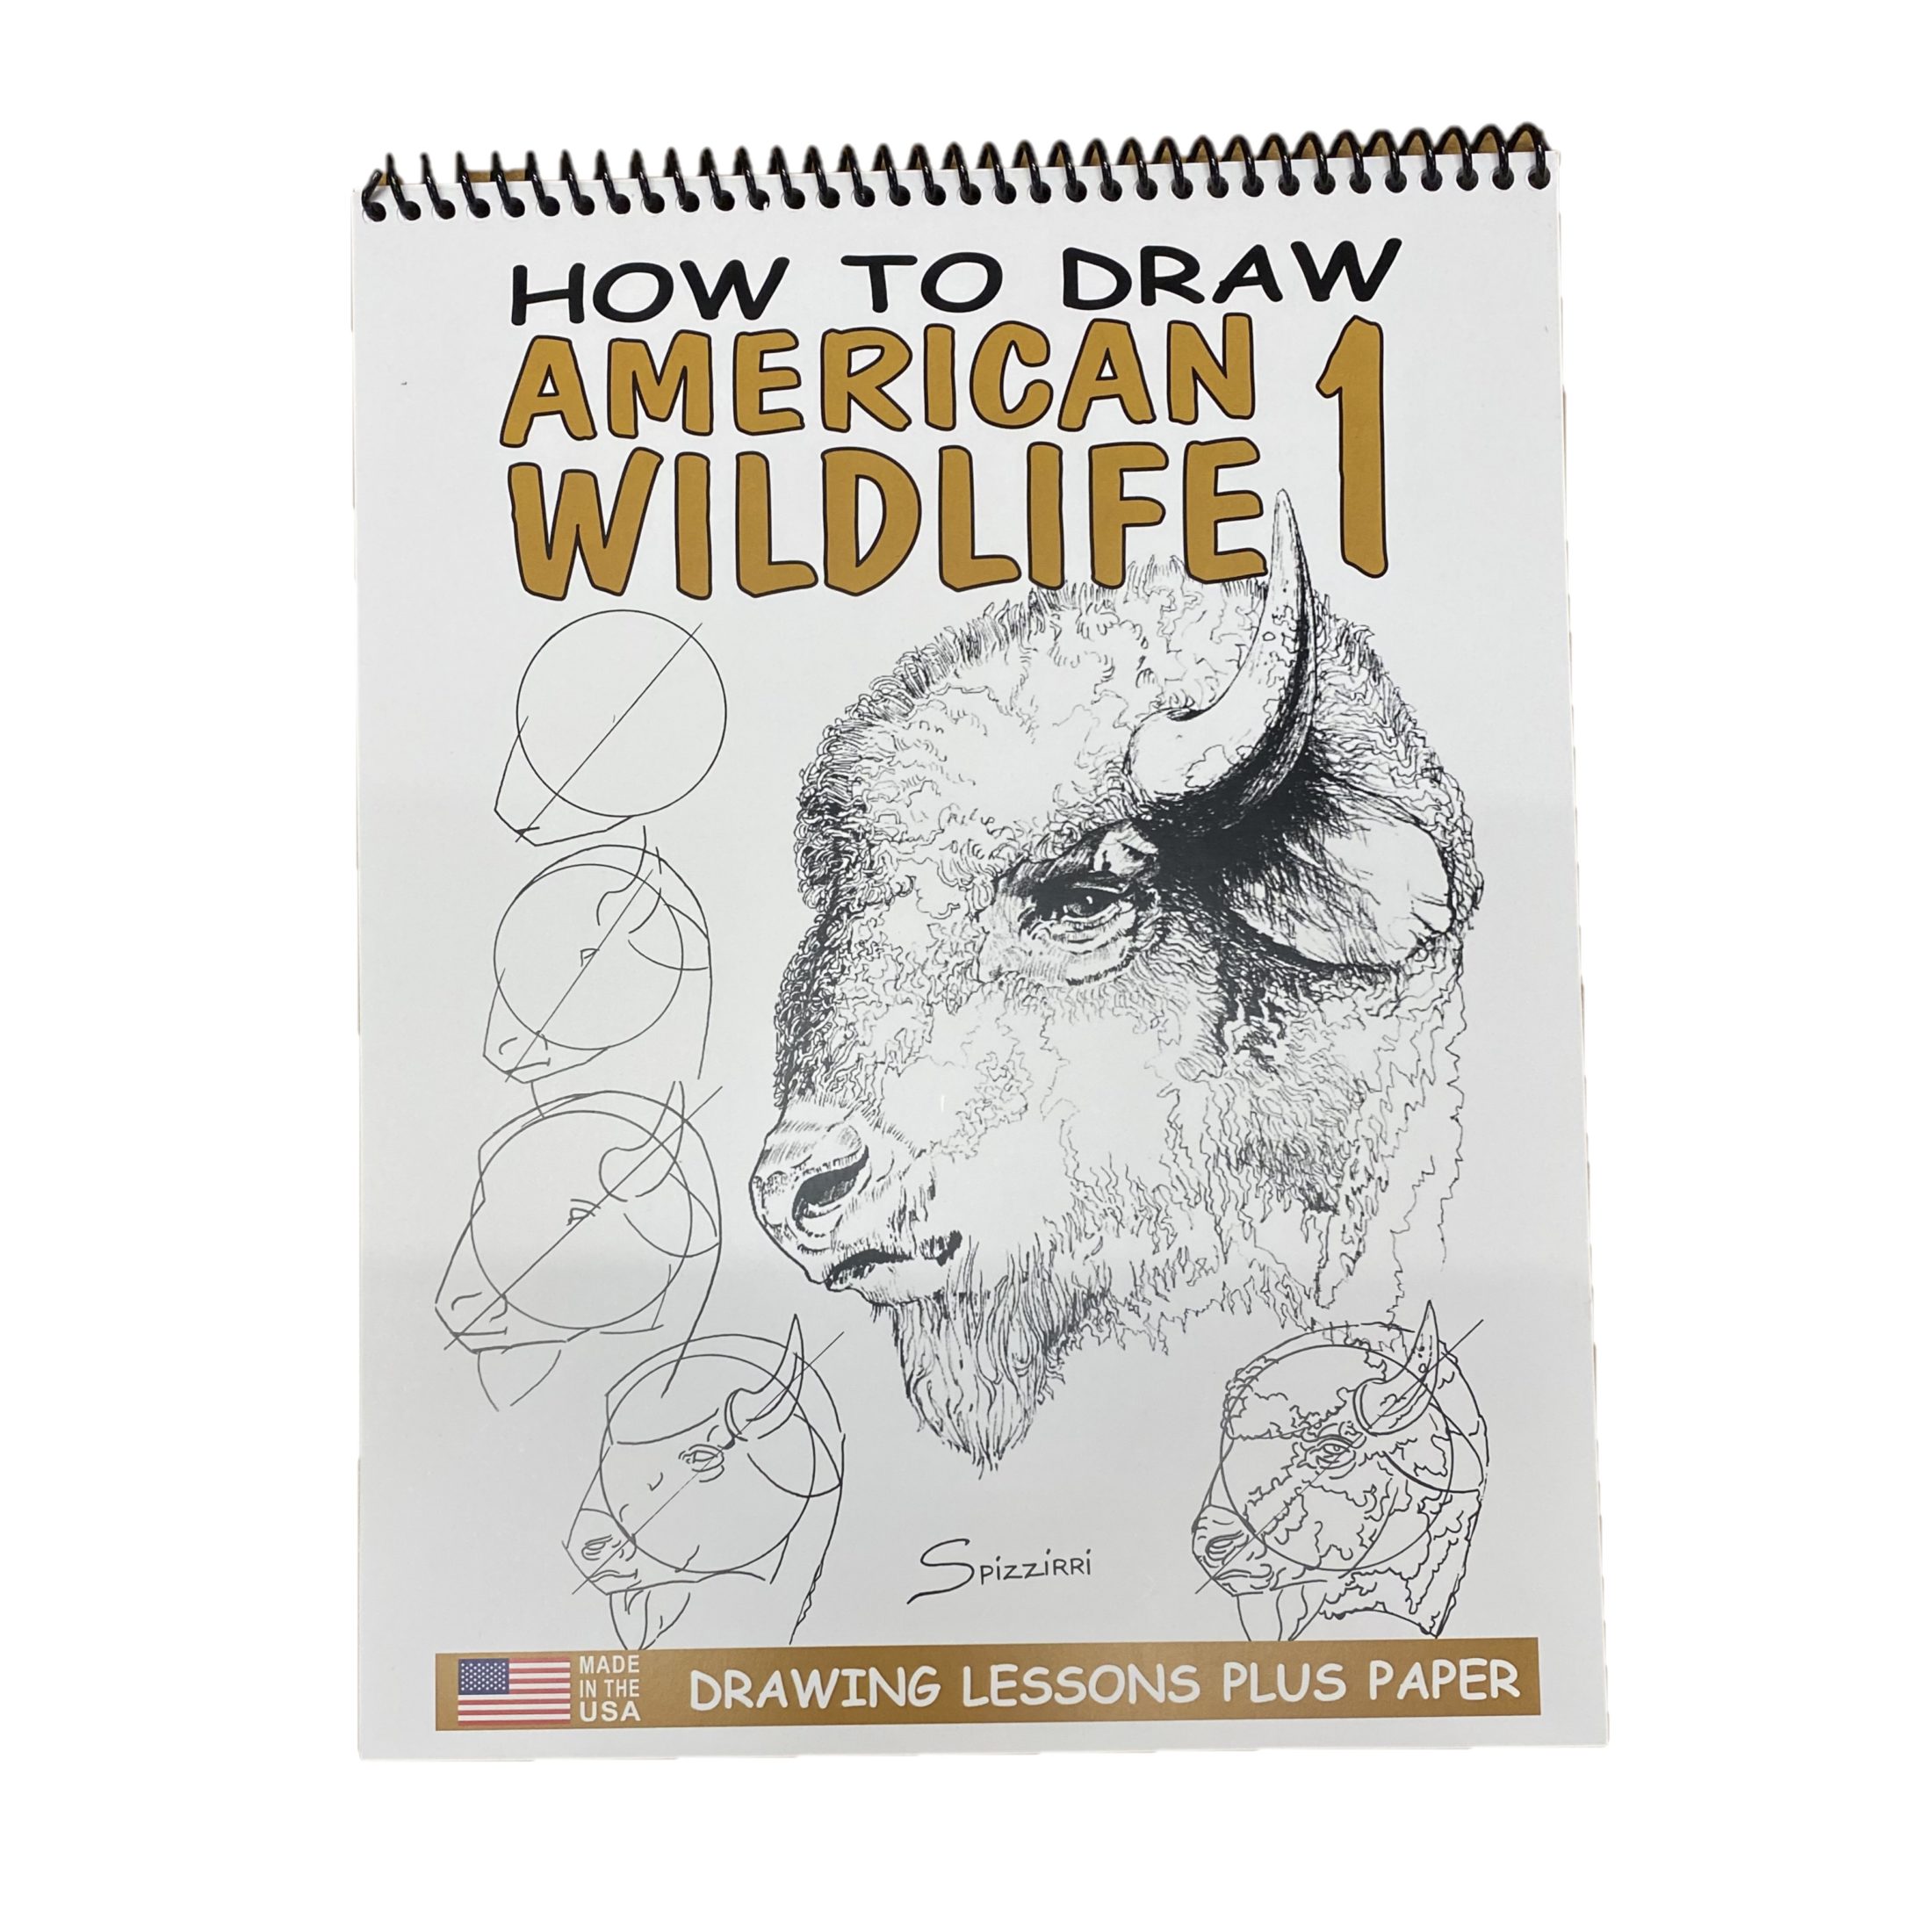 HOW TO DRAW AMERICAN WILDLIFE - Black Hills Parks & Forests Association